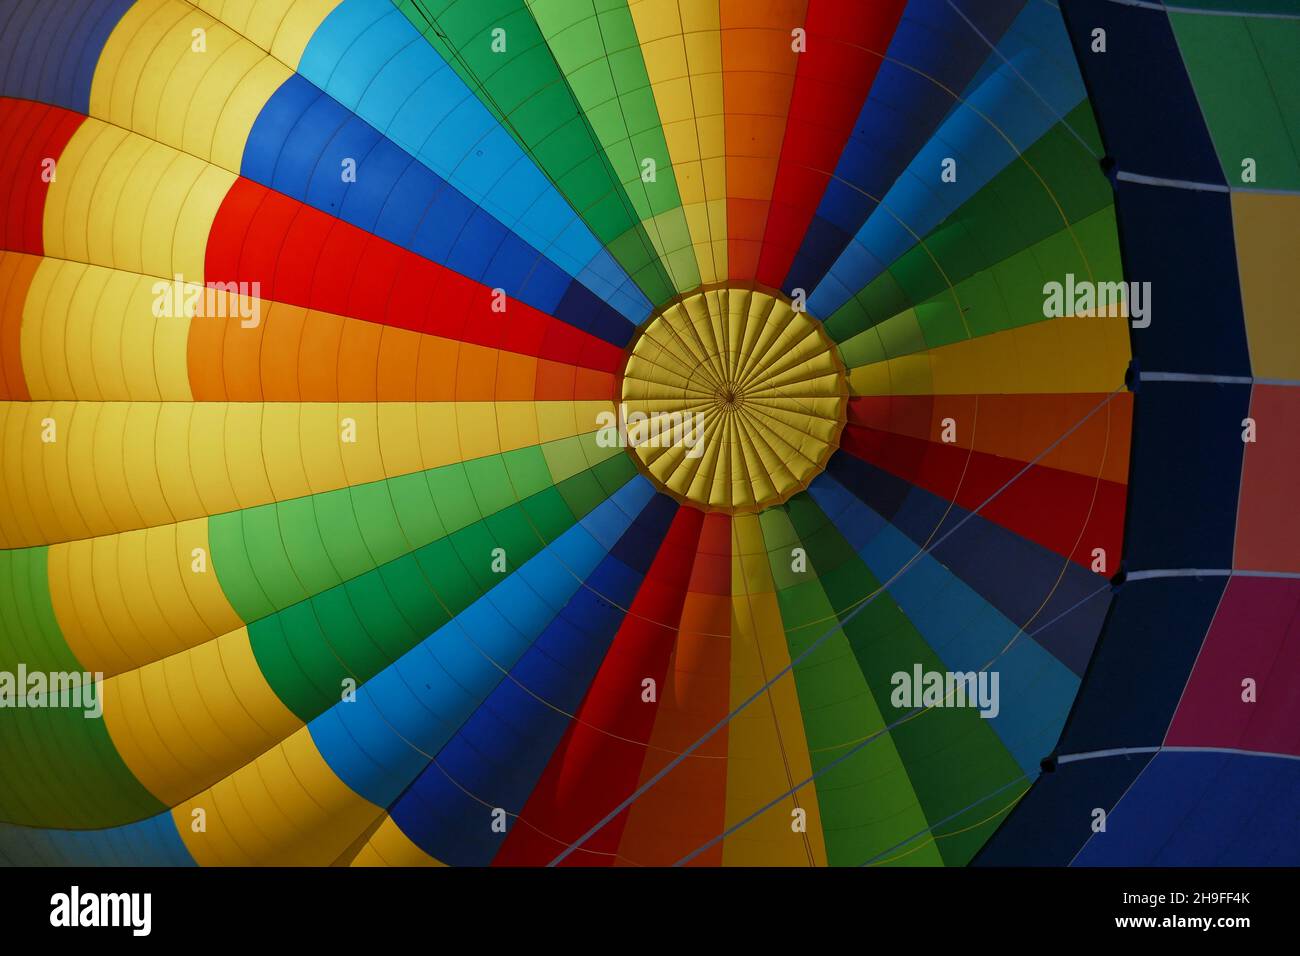 Symmetrical pattern of colorful hot air balloon viewed from below Stock Photo